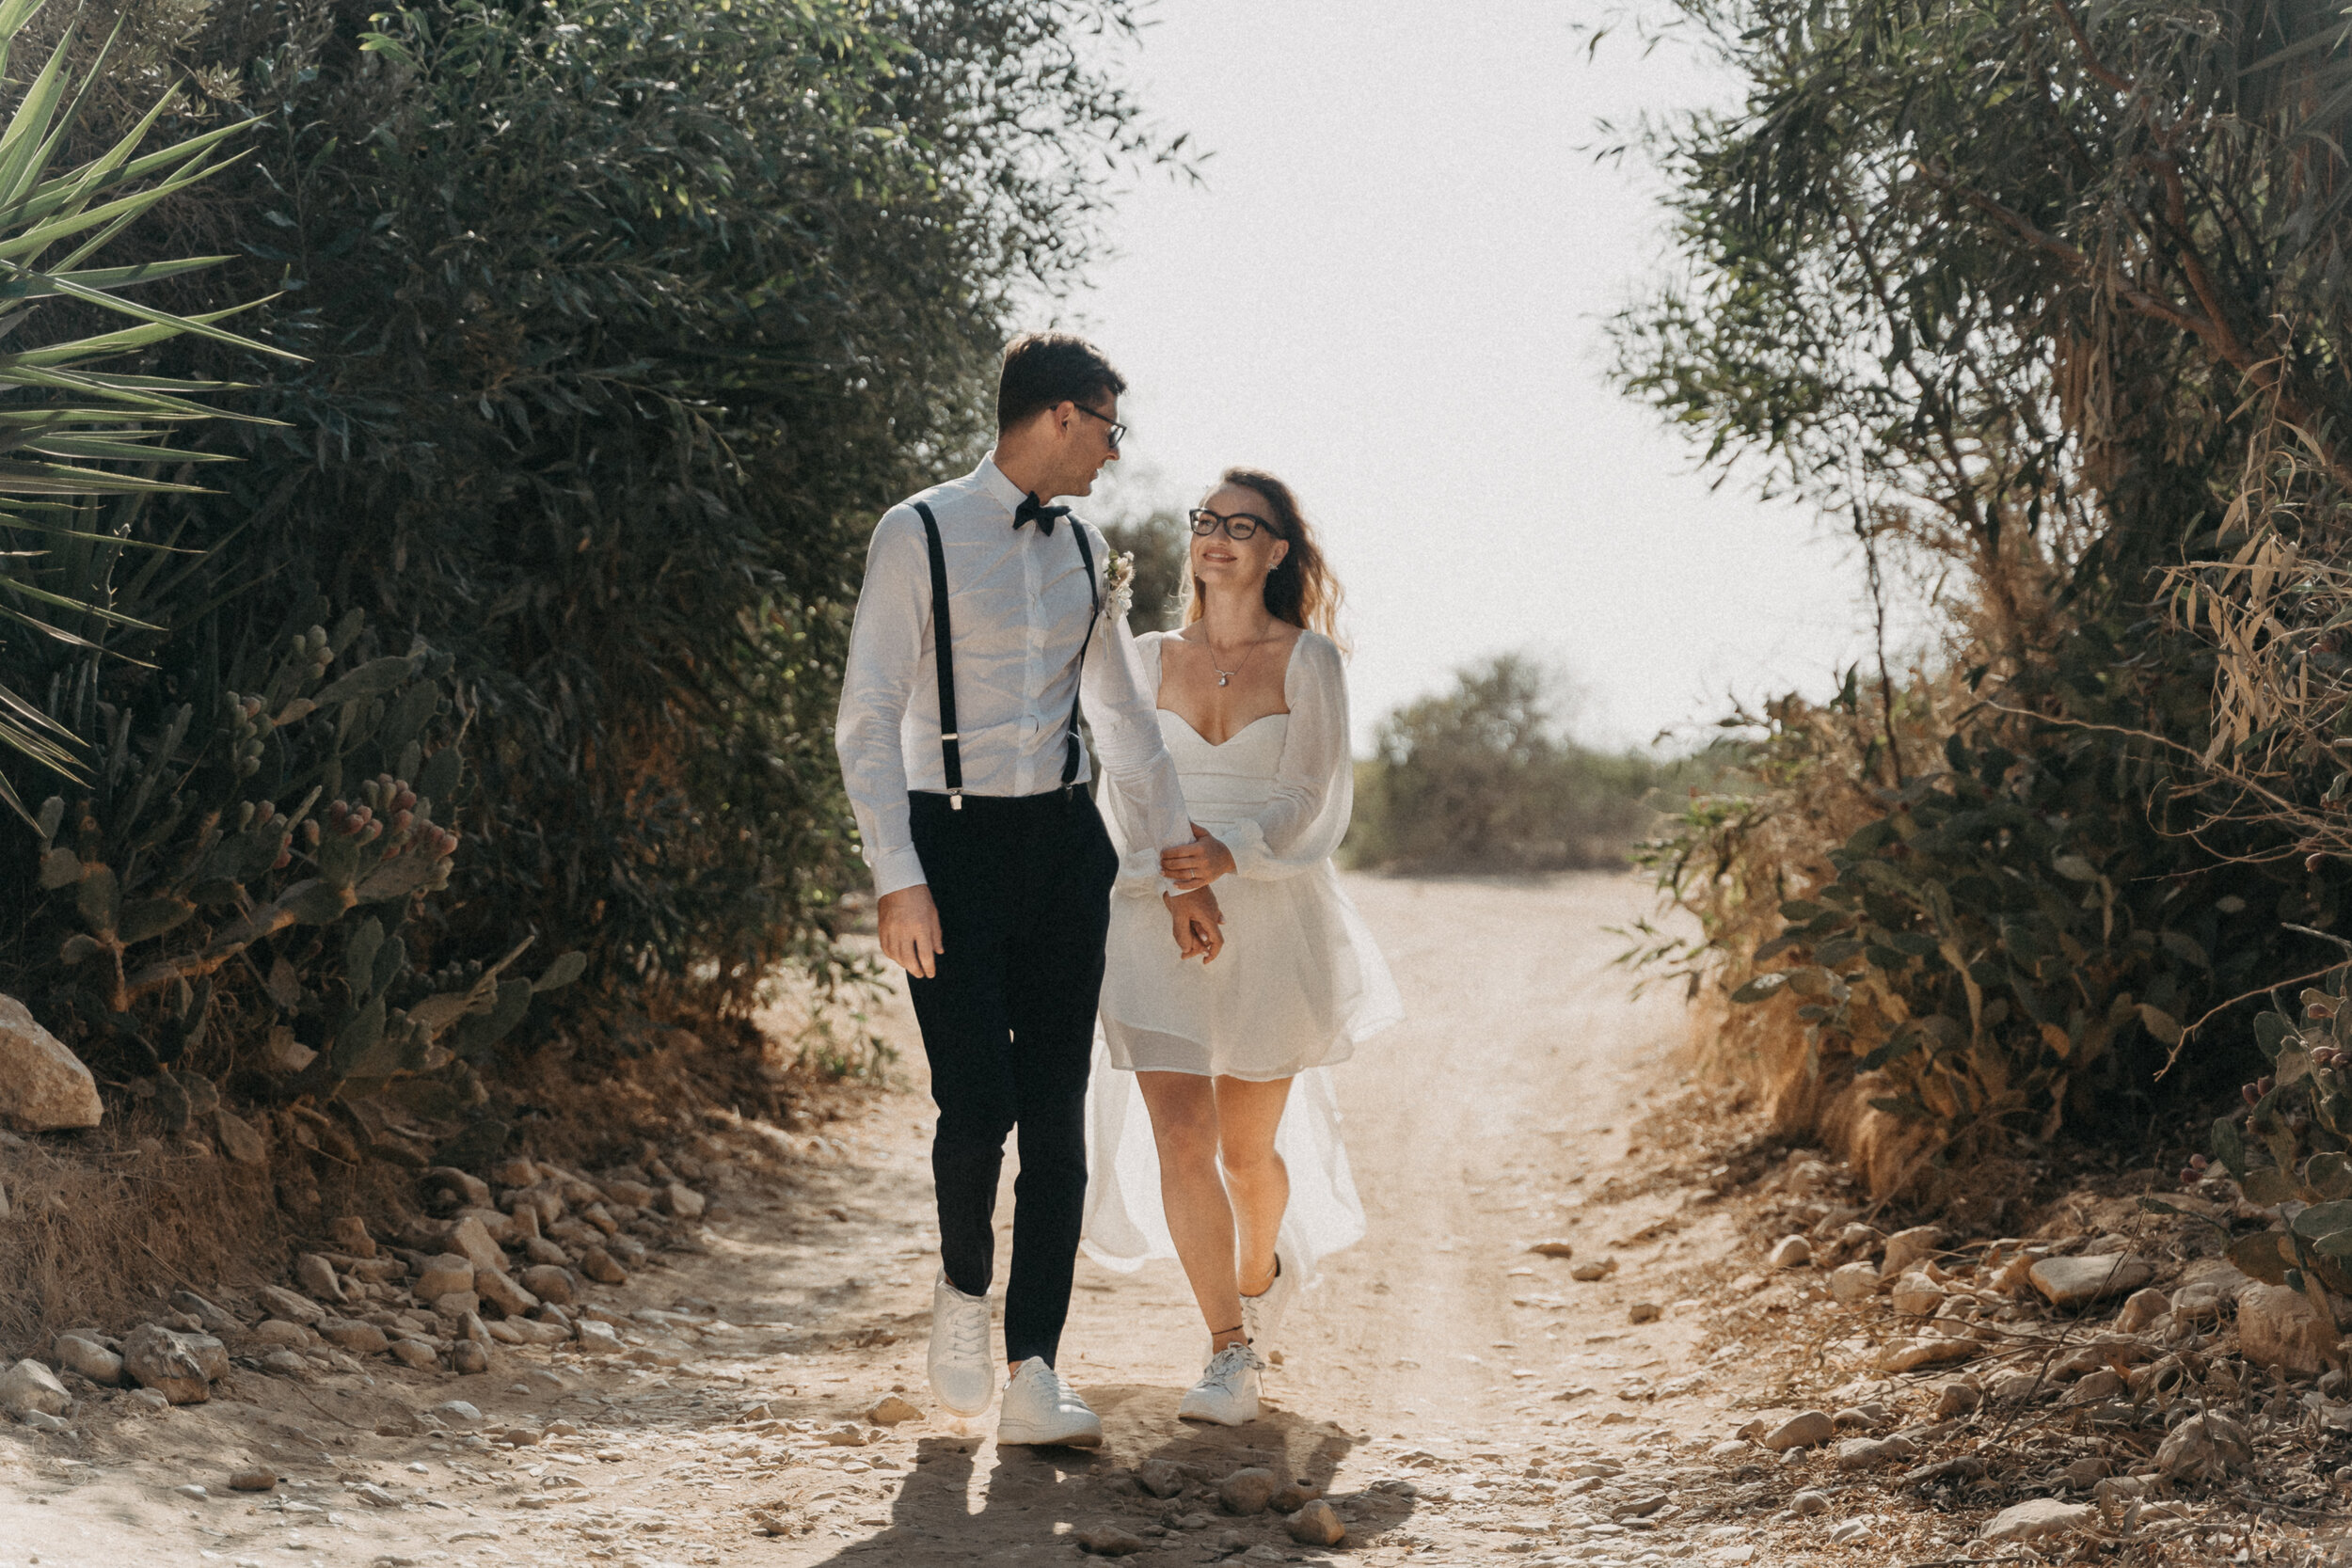 Trust us to preserve your once-in-a-lifetime moments with wedding photography in Cyprus